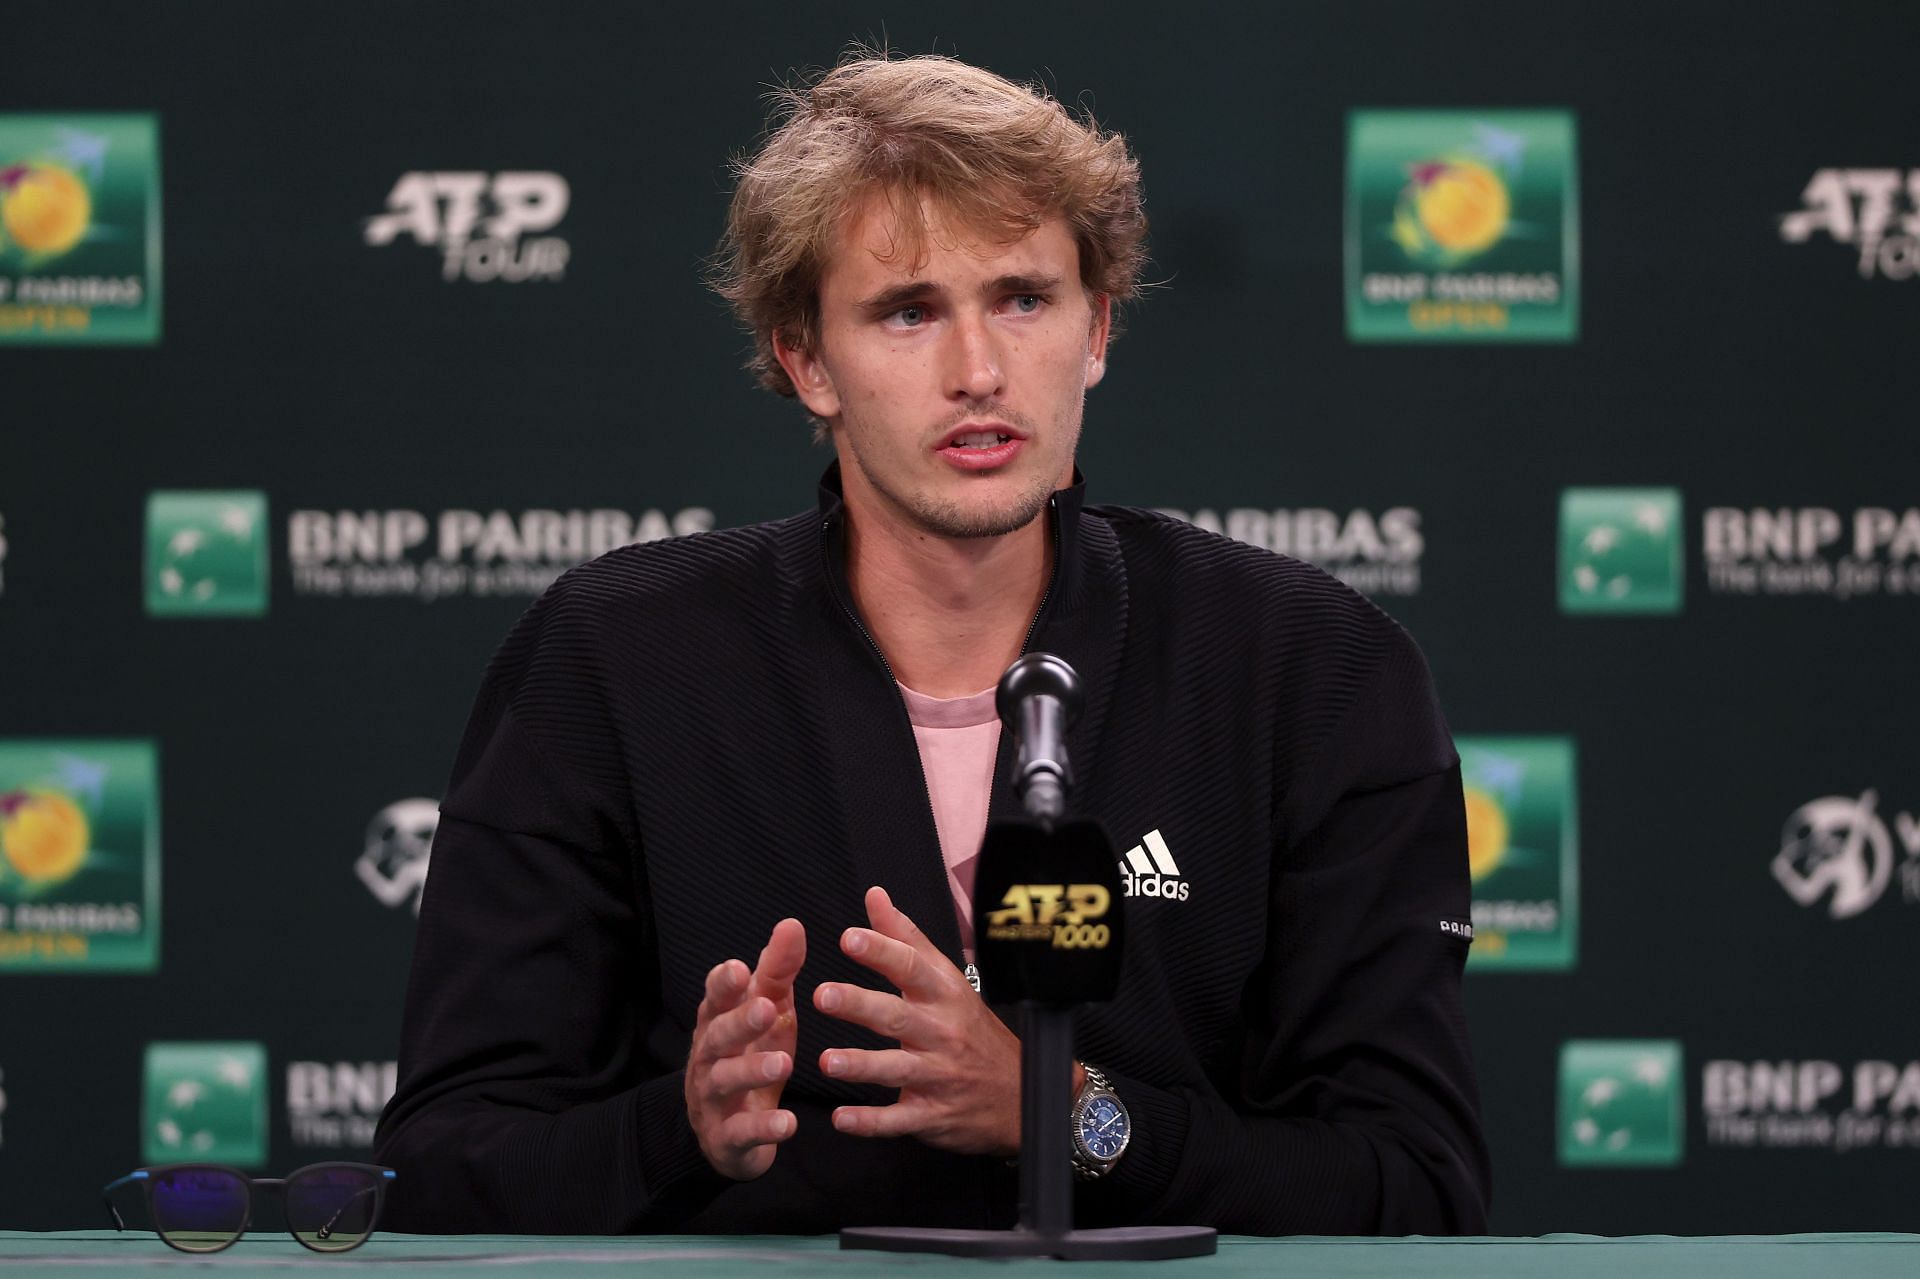 Alexander Zverev takes on Tommy Paul in the second round of the 2022 Indian Wells Masters